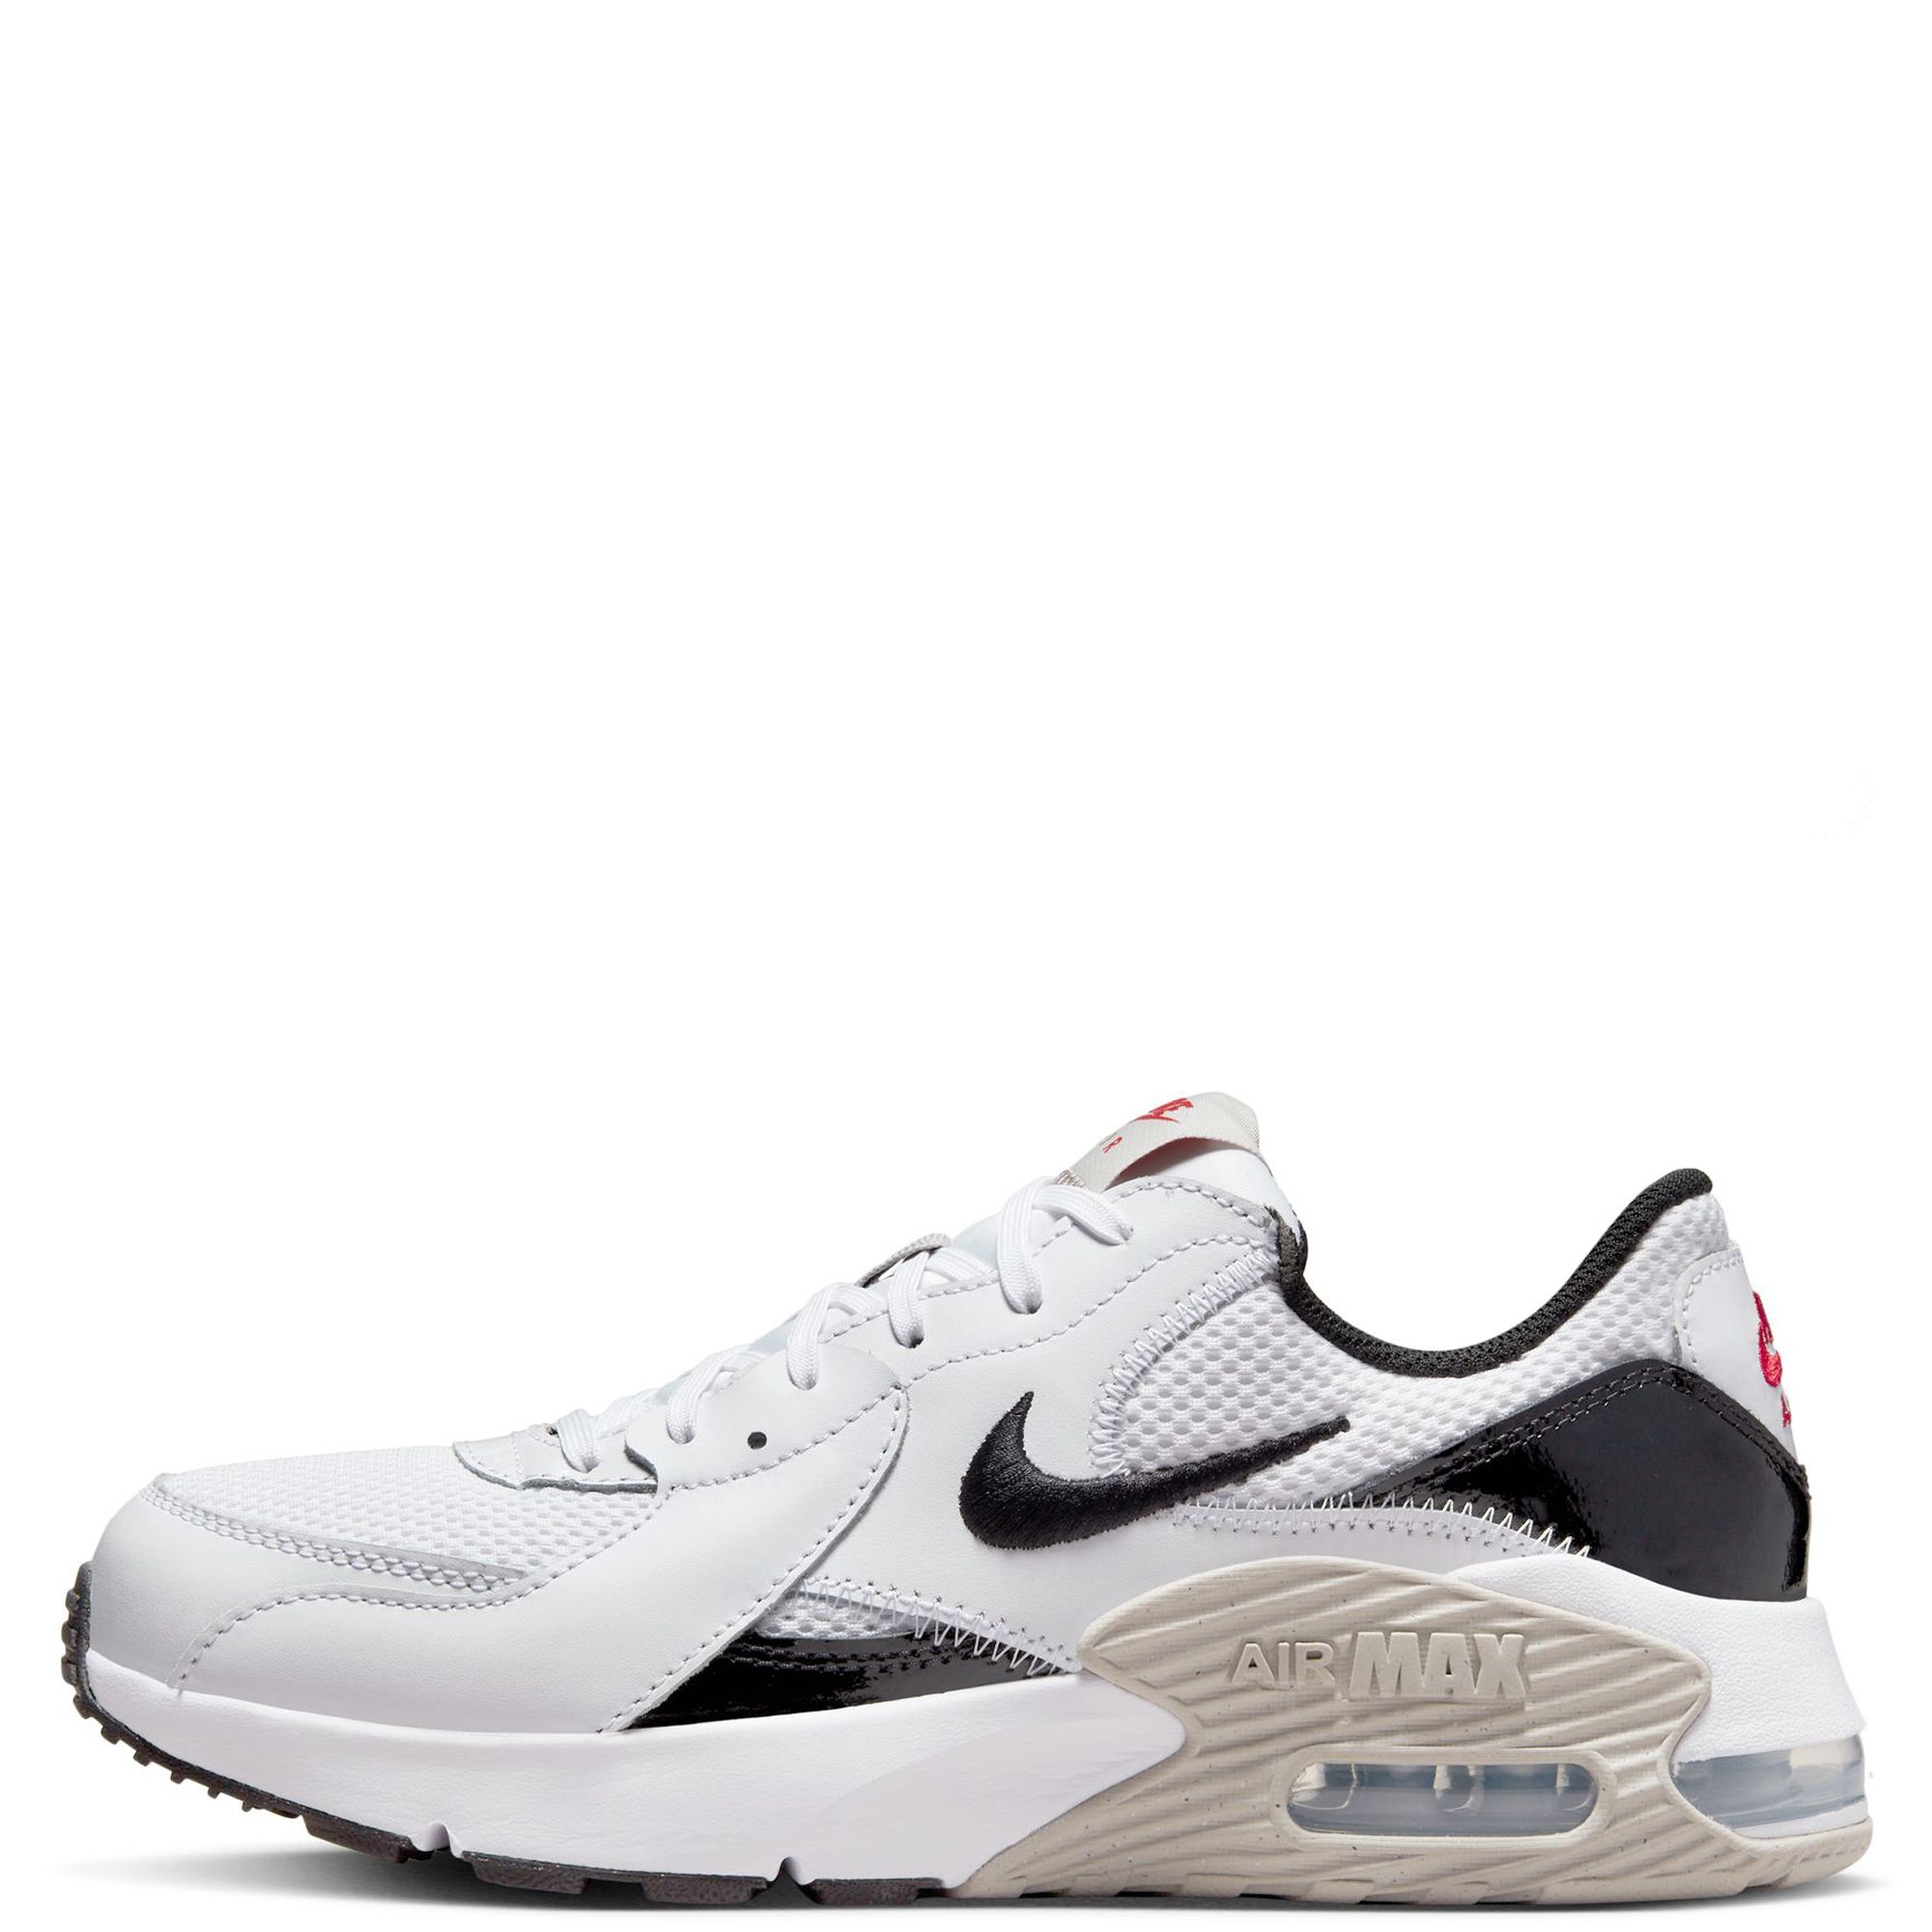 Nike Air Max Excee Comes in White and Red  Nike air max, Nike air max  excee, Air max excee